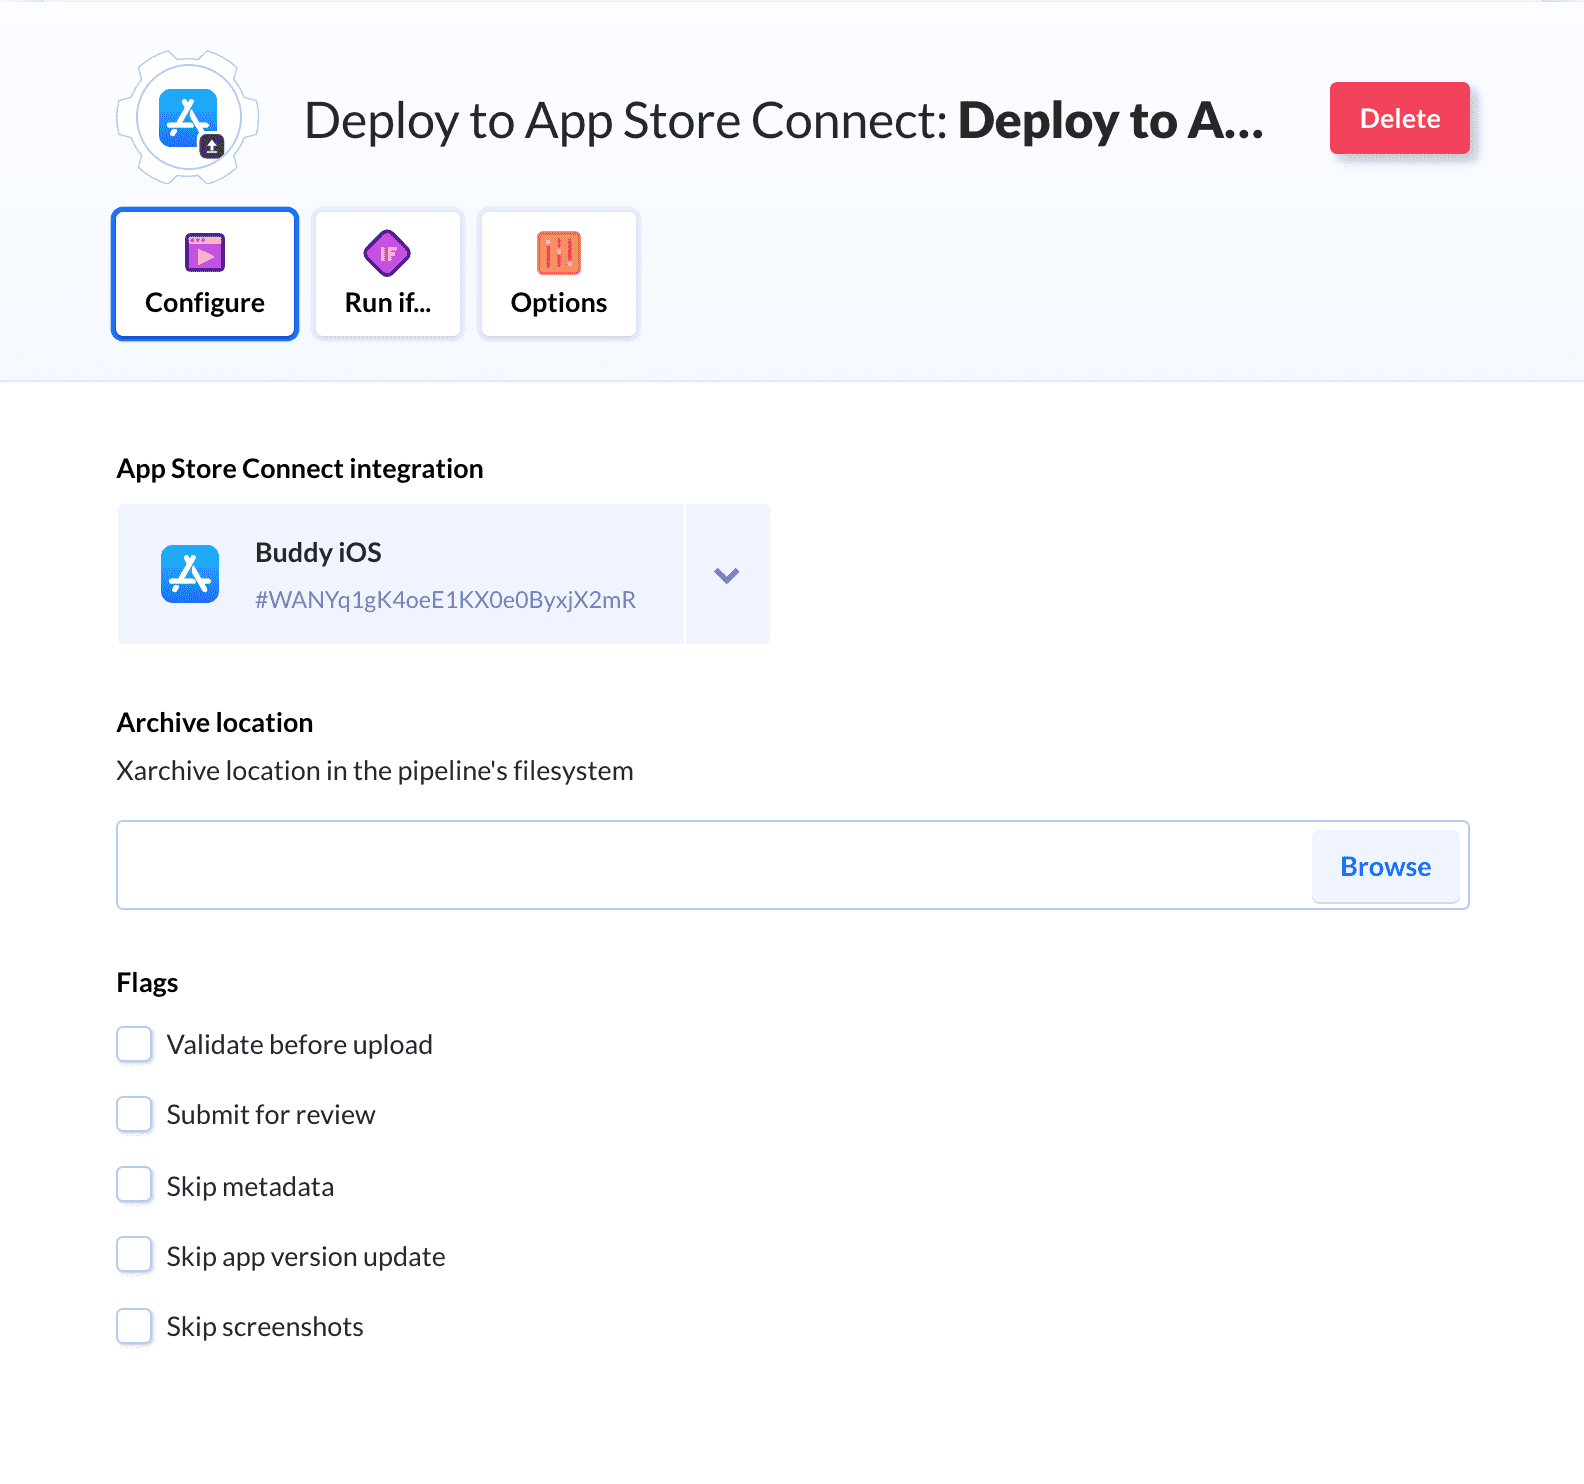 Deployment to App Store